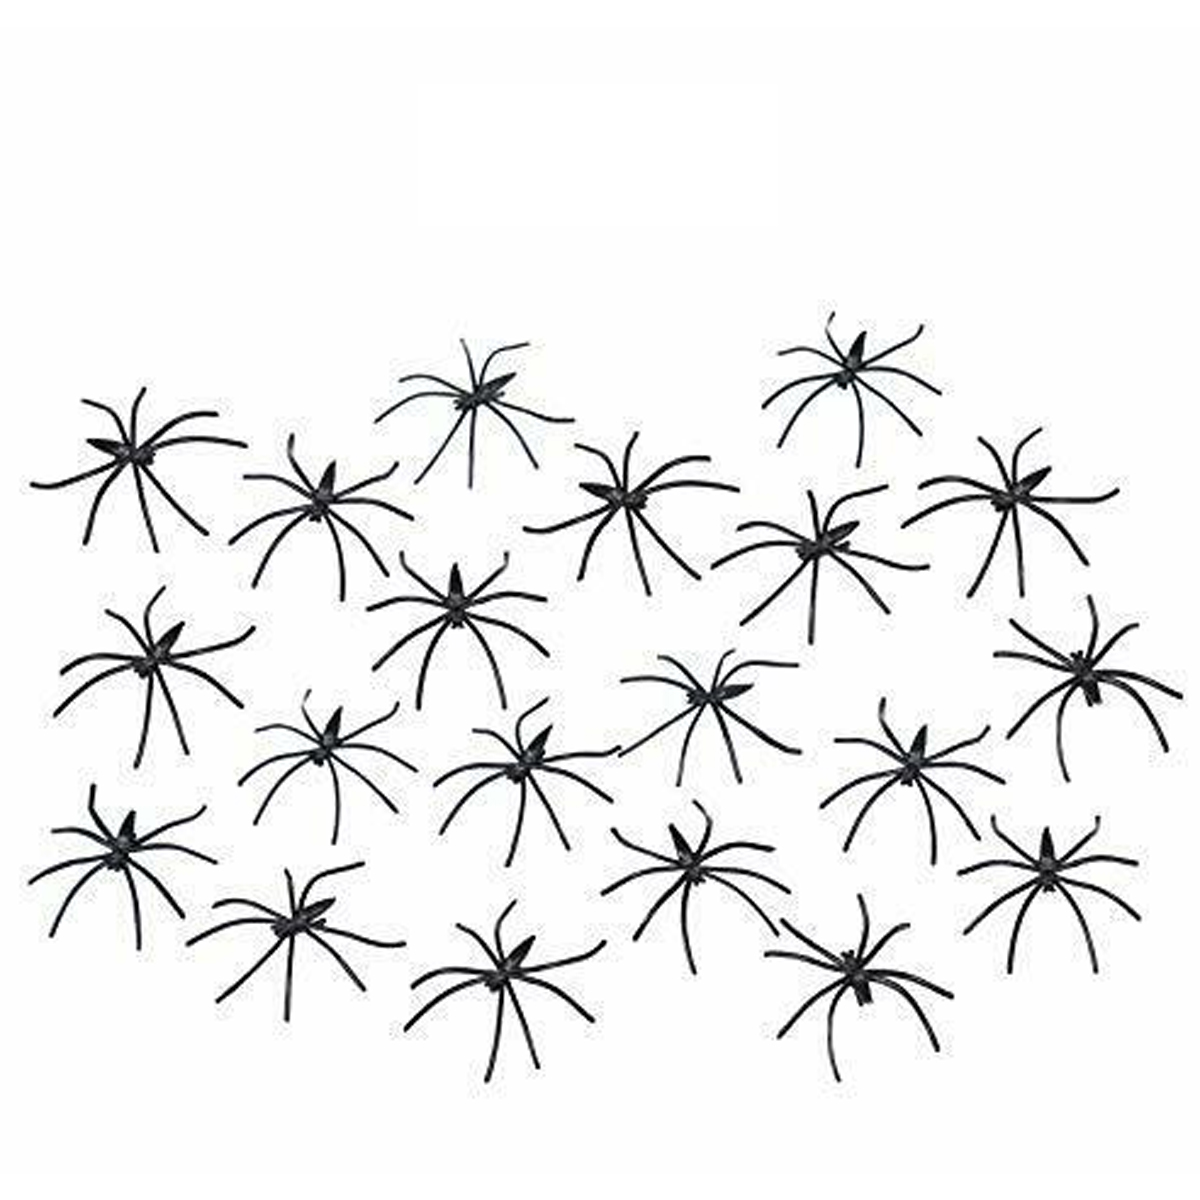 250g-Spider-Web-With-48Pcs-Small-Spiders-Halloween-Outdoor-Party-Decorations-Props-Supplies-1730880-9